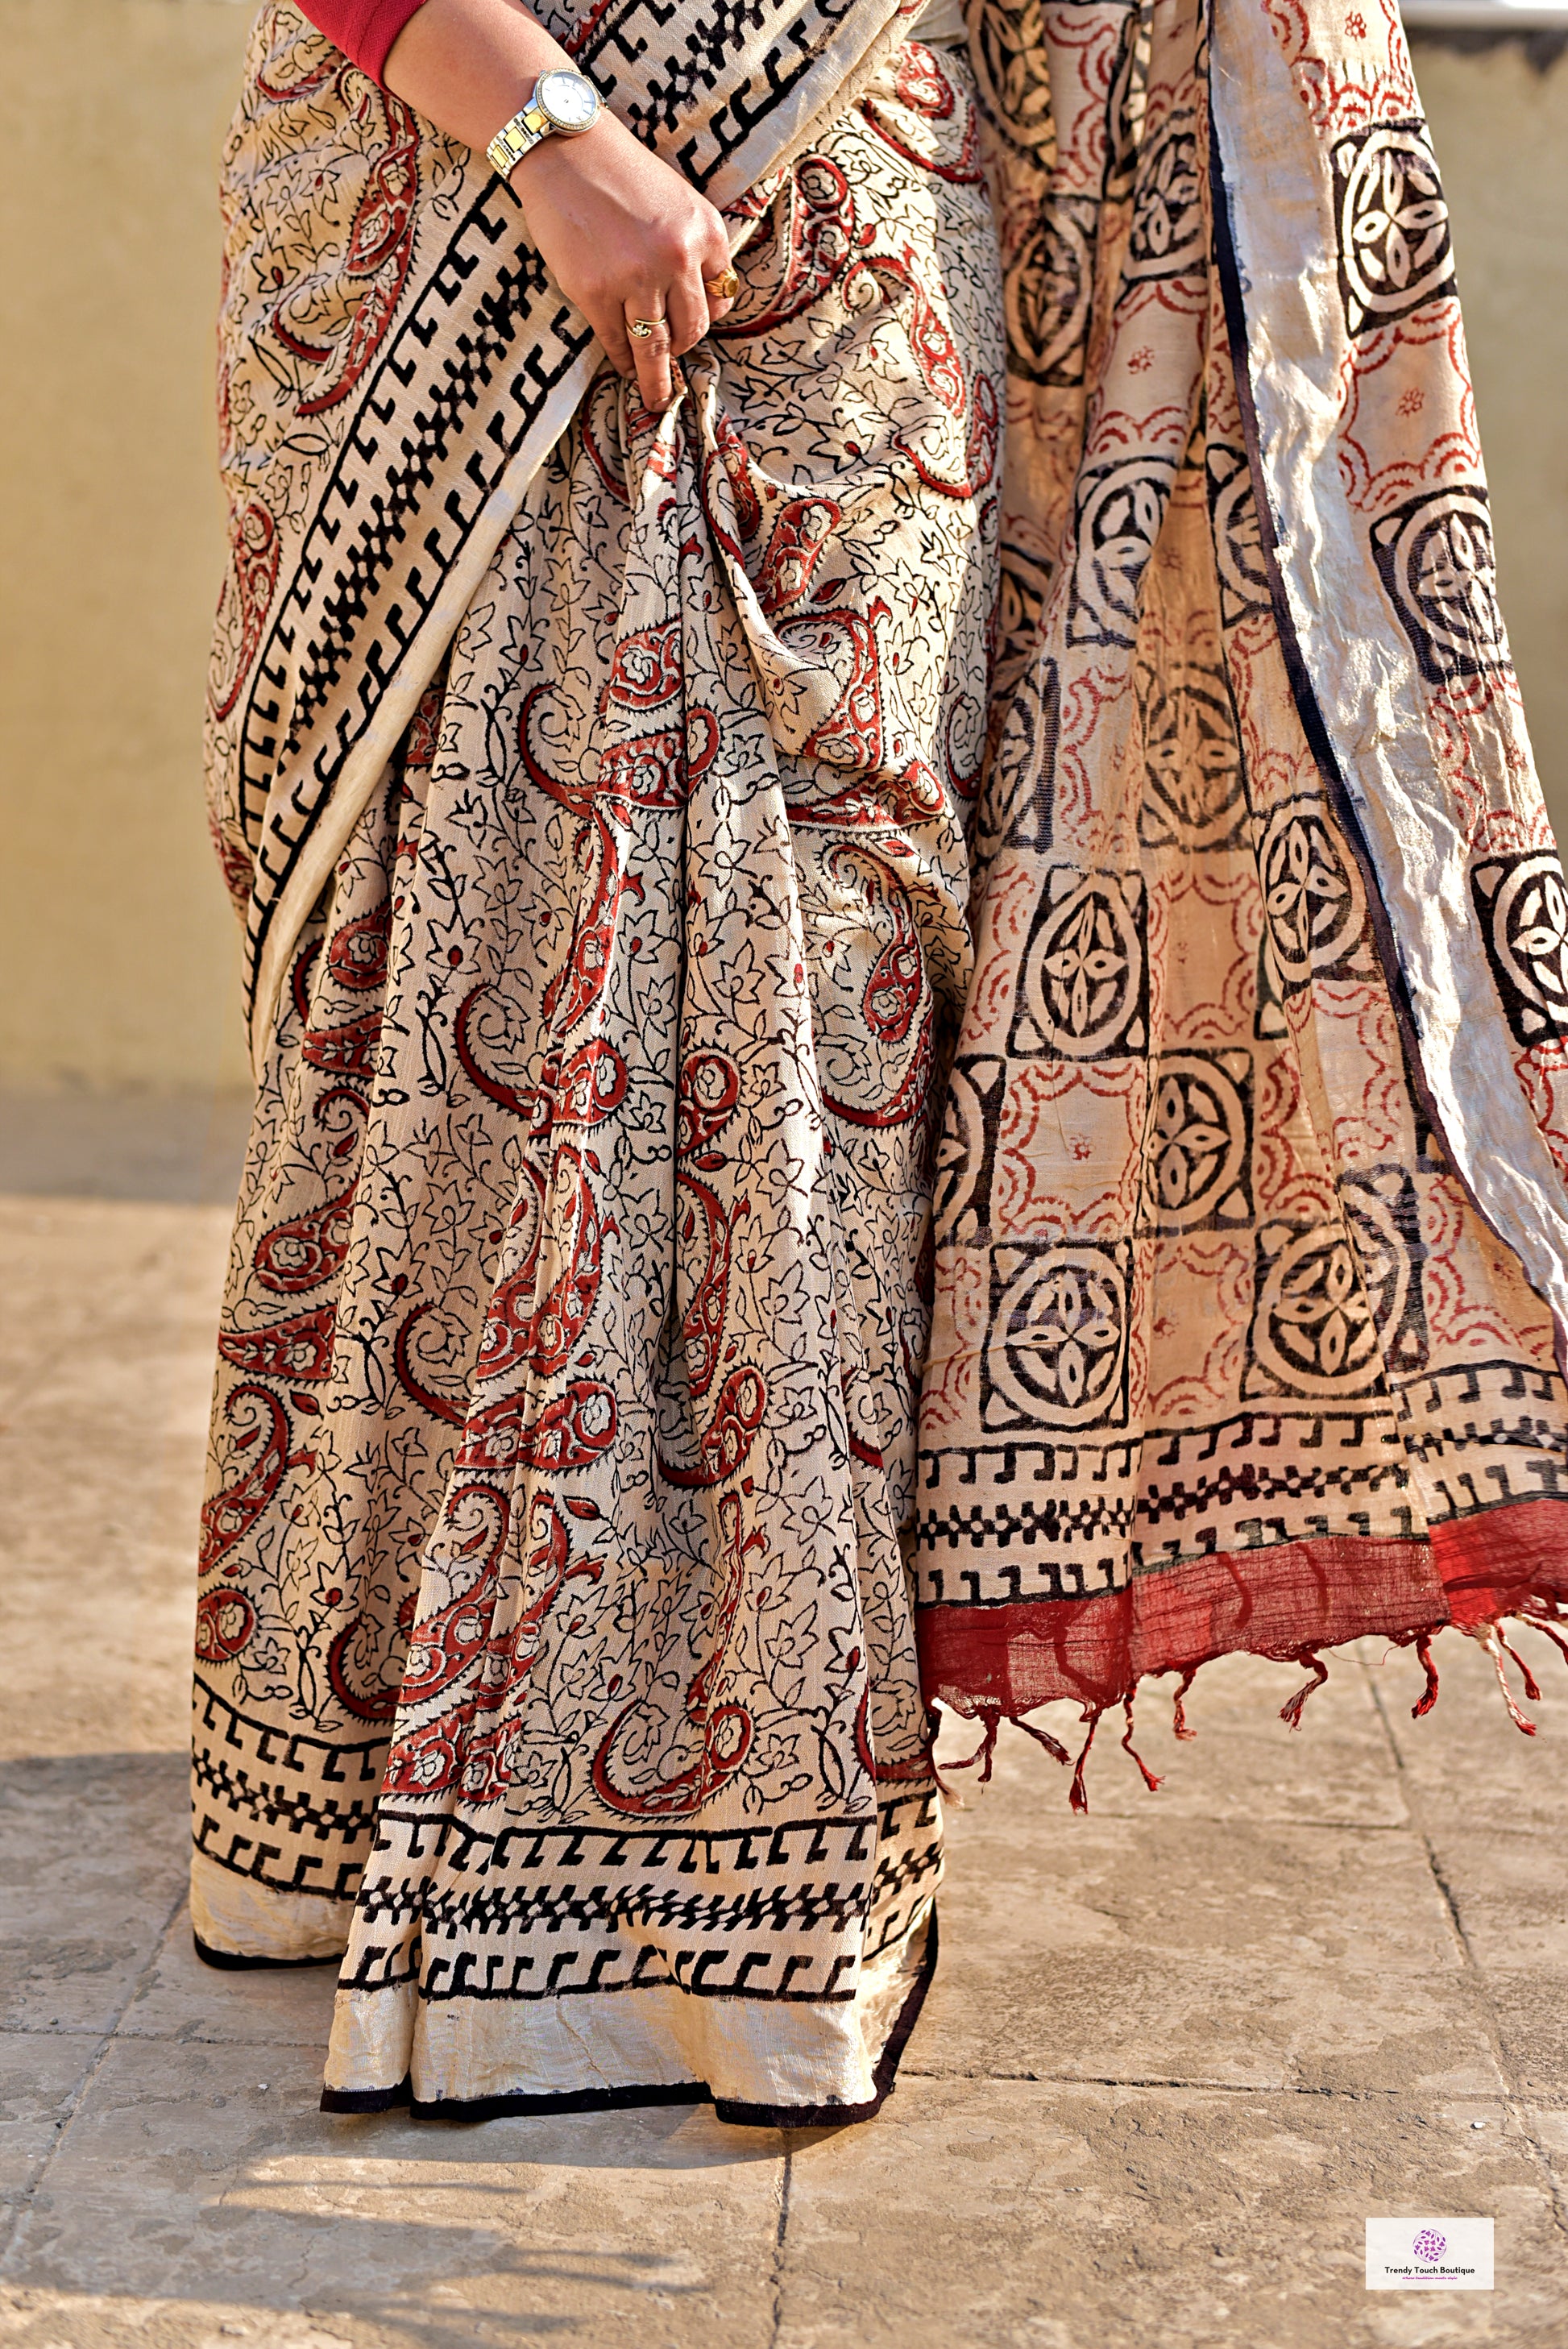 Beige Maroon Black Organic Handblock print in natural dye linen saree office and casual styling best price best summer fabric with blouse piece